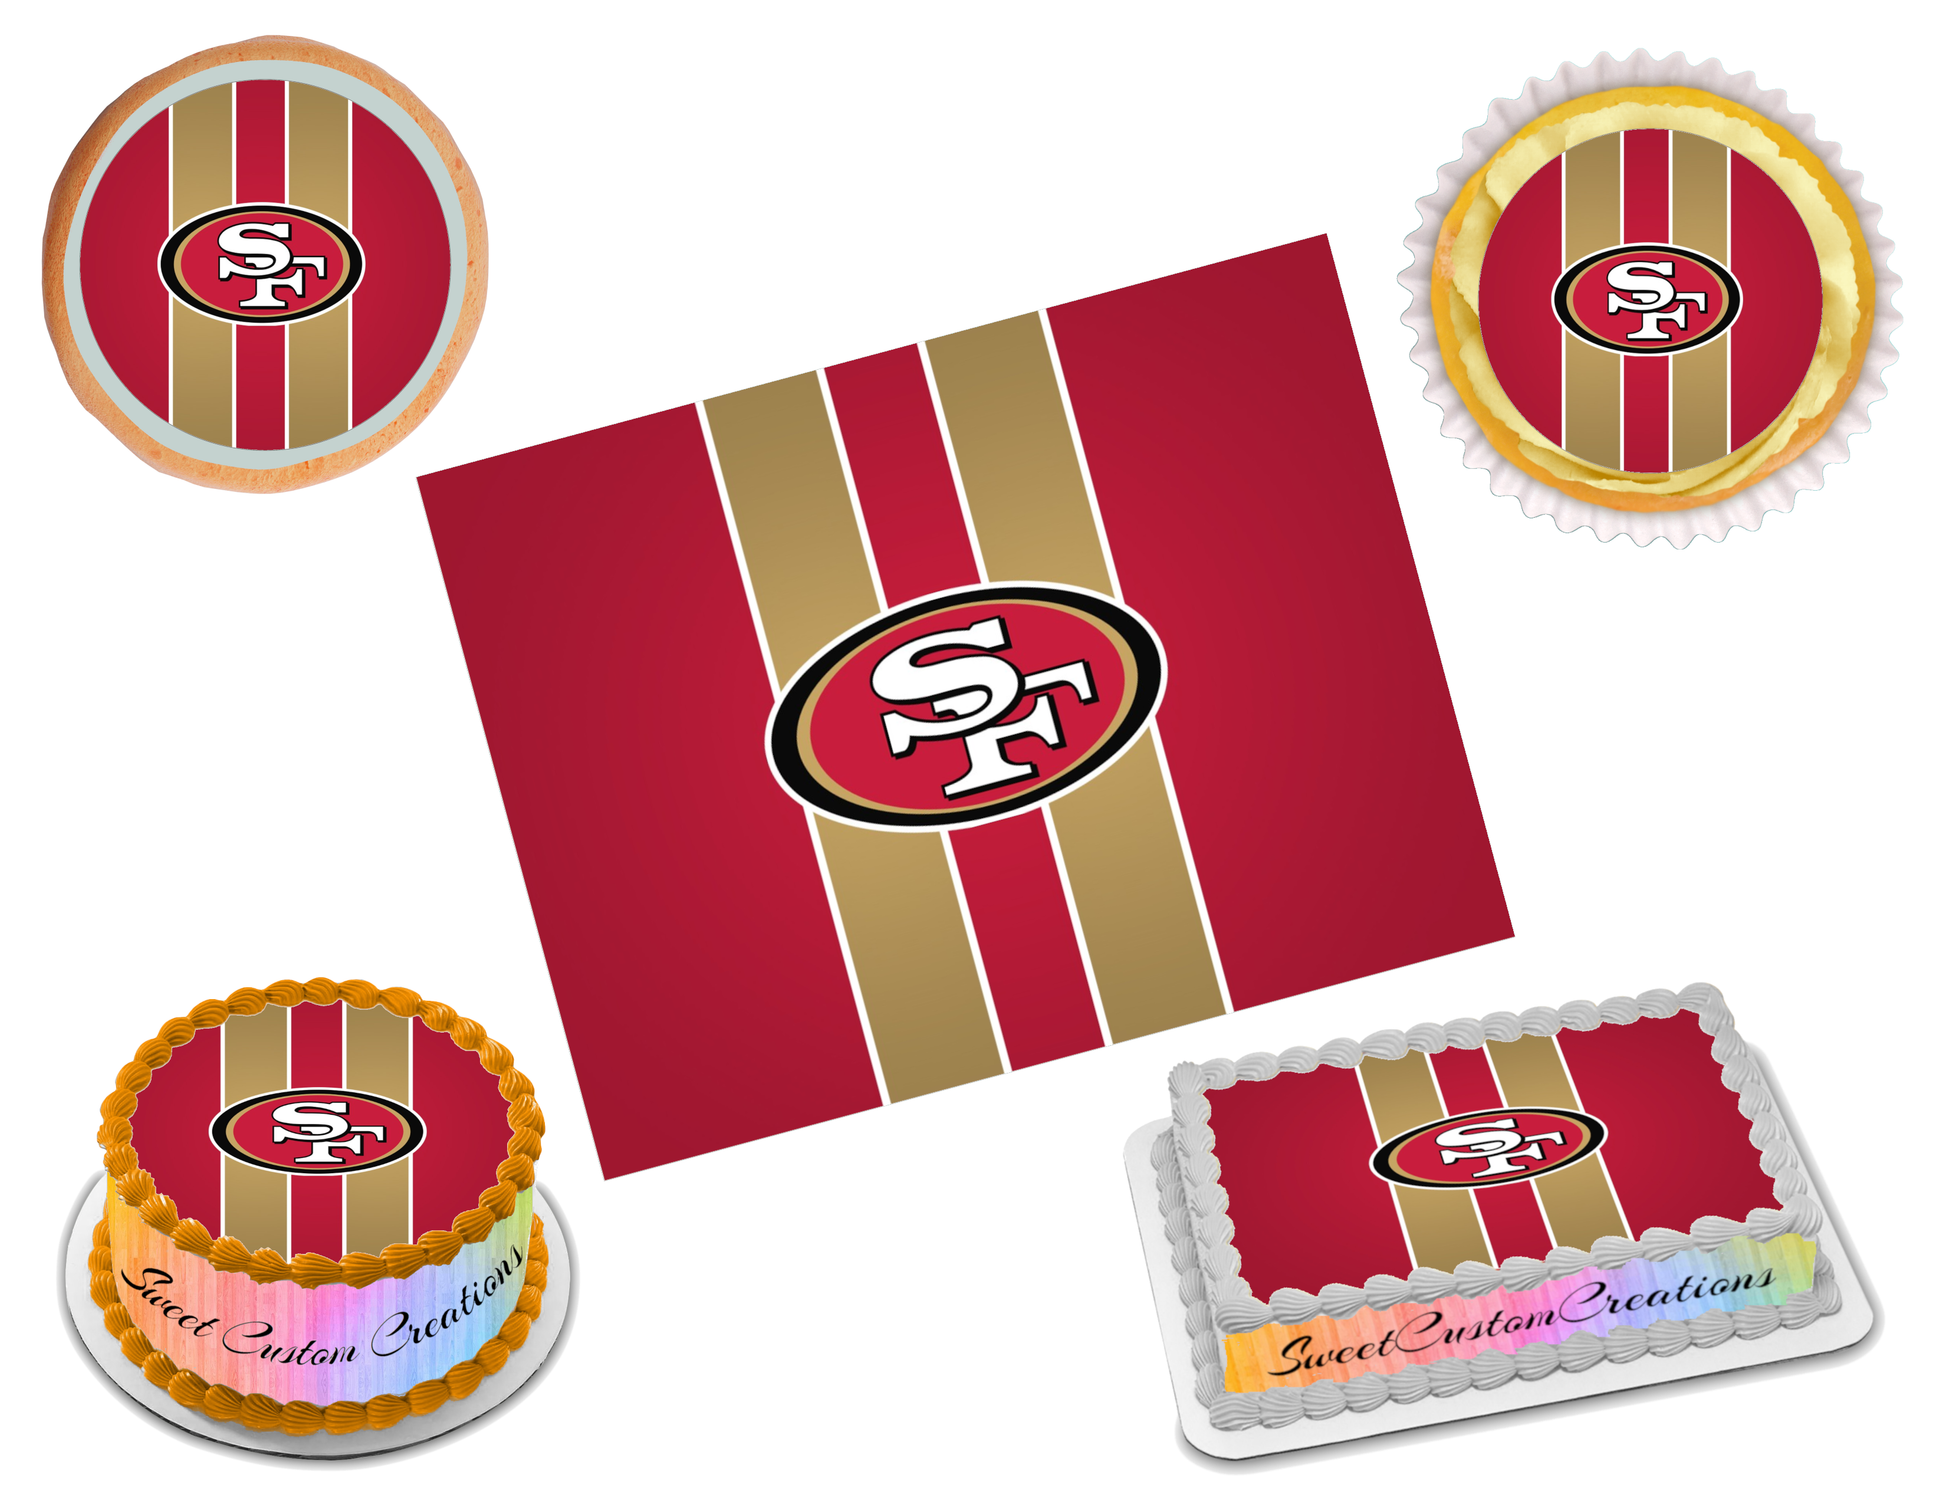 San Francisco 49ers Birthday Cake Topper Sports Party Custom Cake Toppers